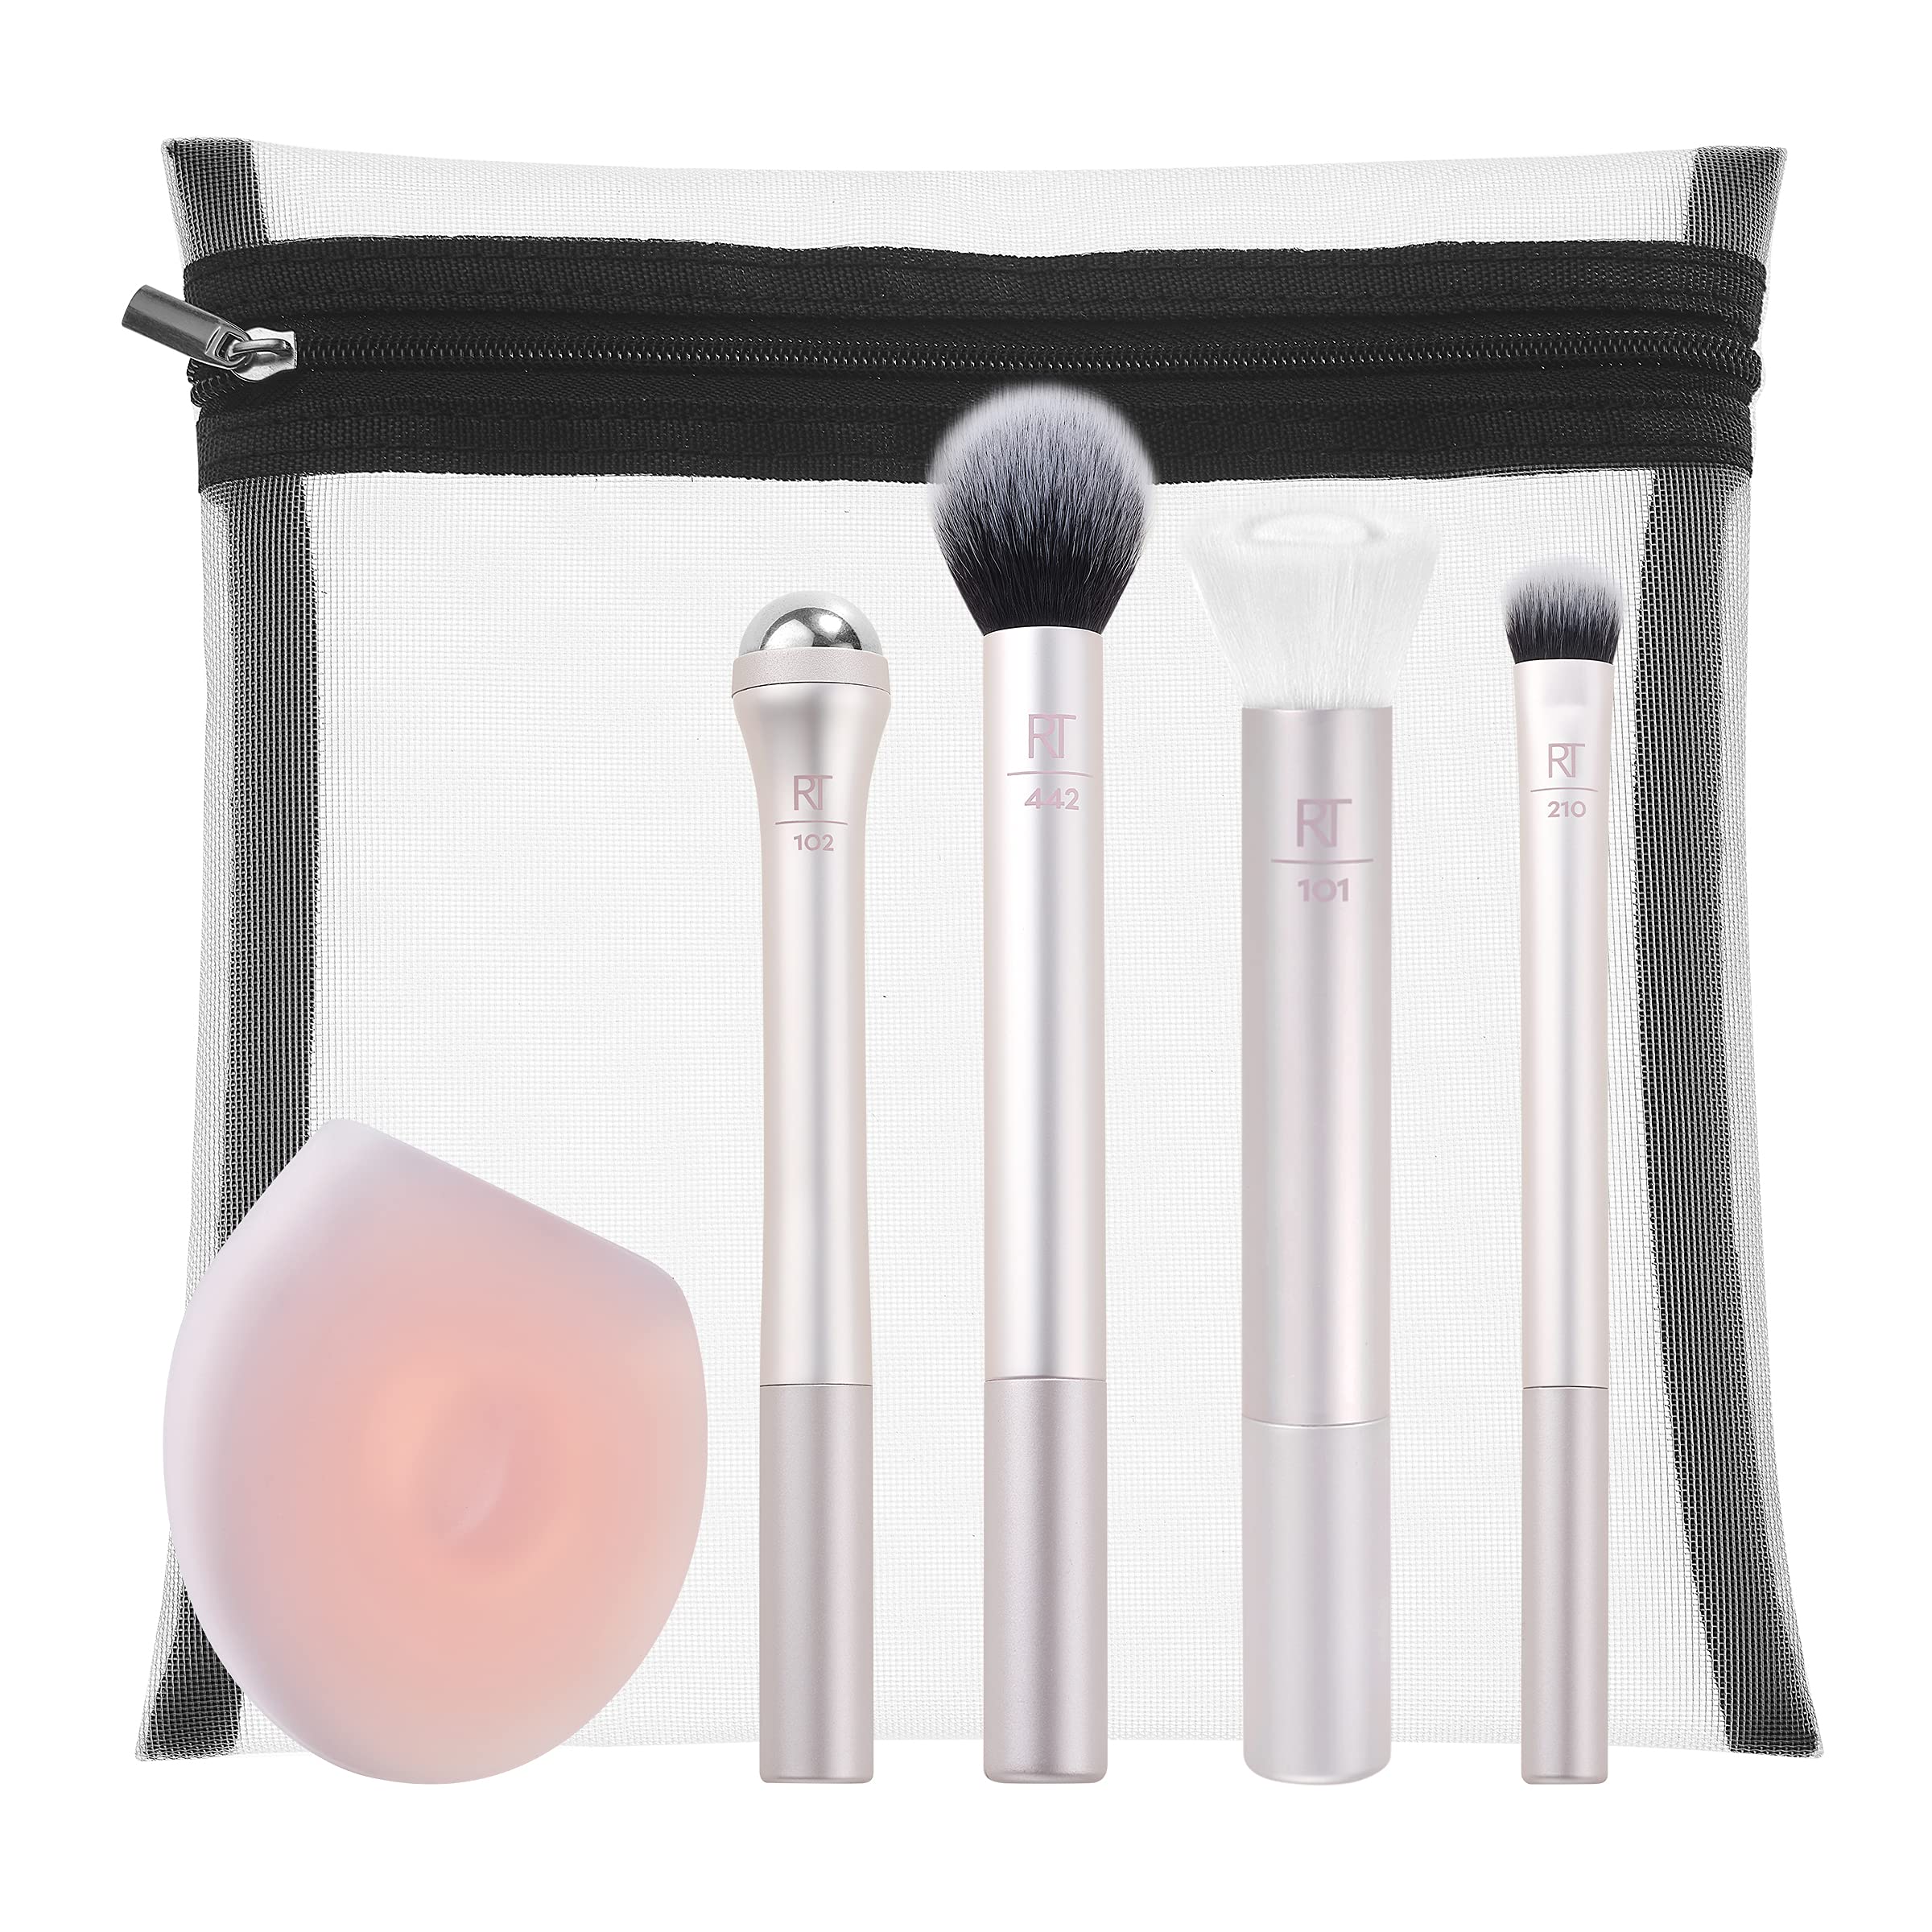 Real Techniques Limited Edition Me Time Makeup Brush and Skin Care, 6 Piece Valentine’s Day Gift Set, Perfect For Wife, Spouse, Girlfriend, Significant Other, or Daughter